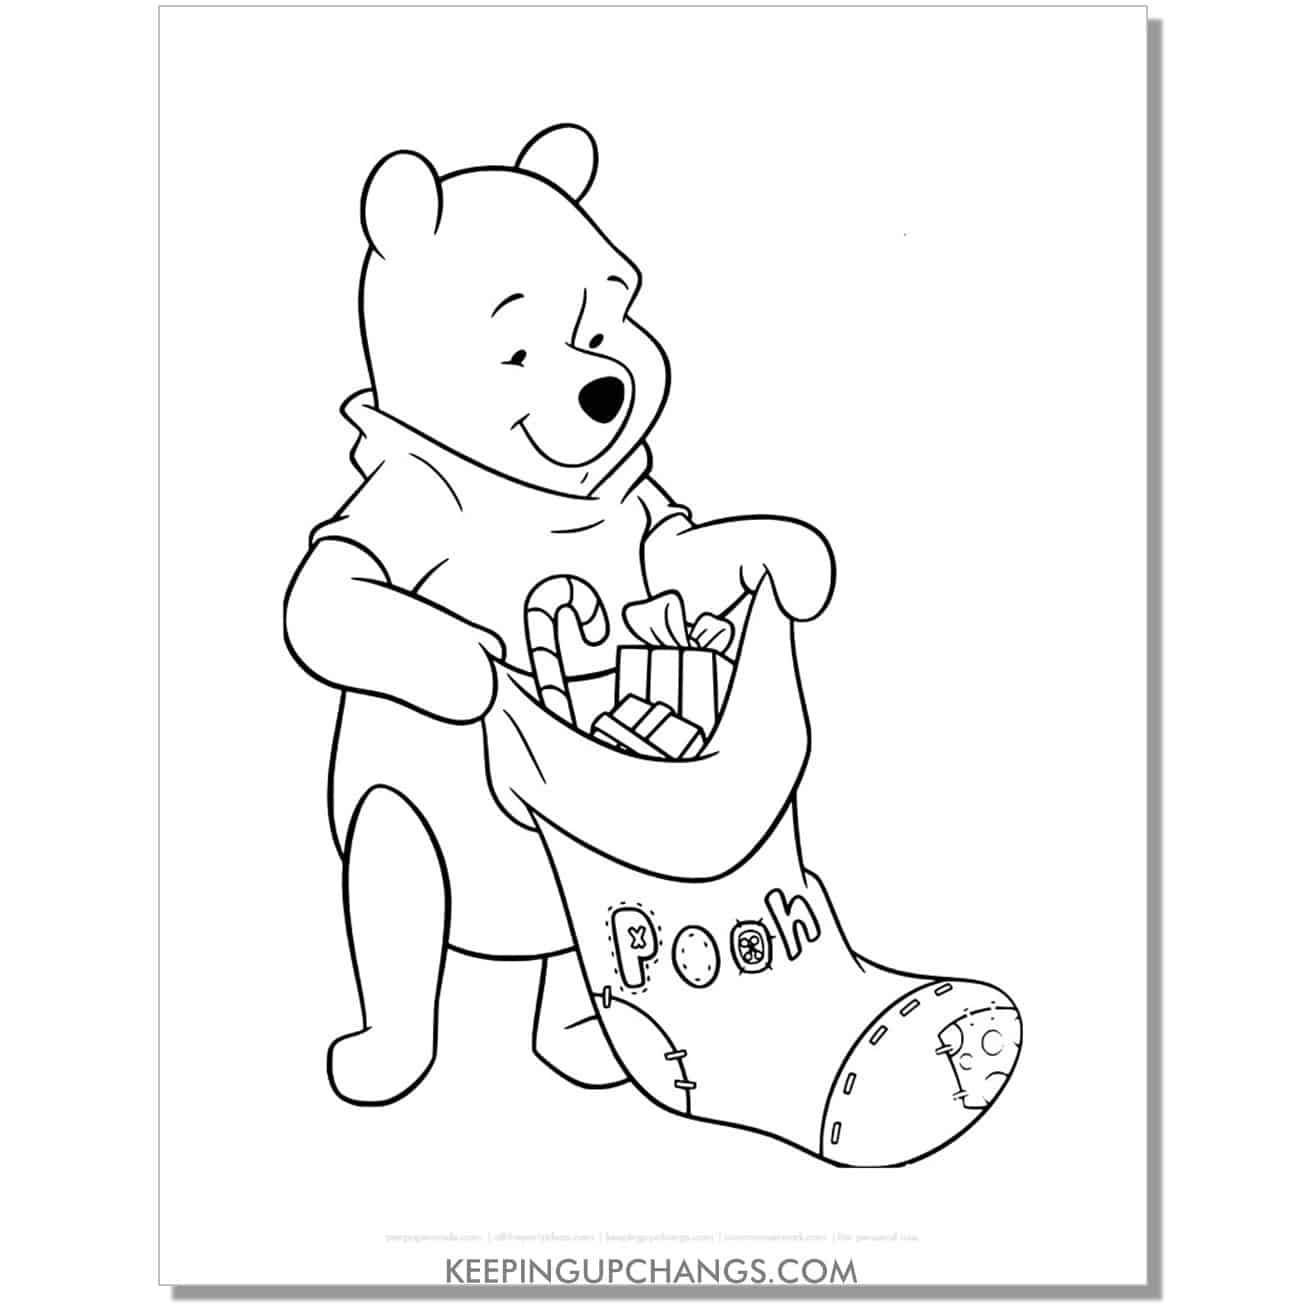 winnie the pooh holding christmas stocking coloring page, sheet.